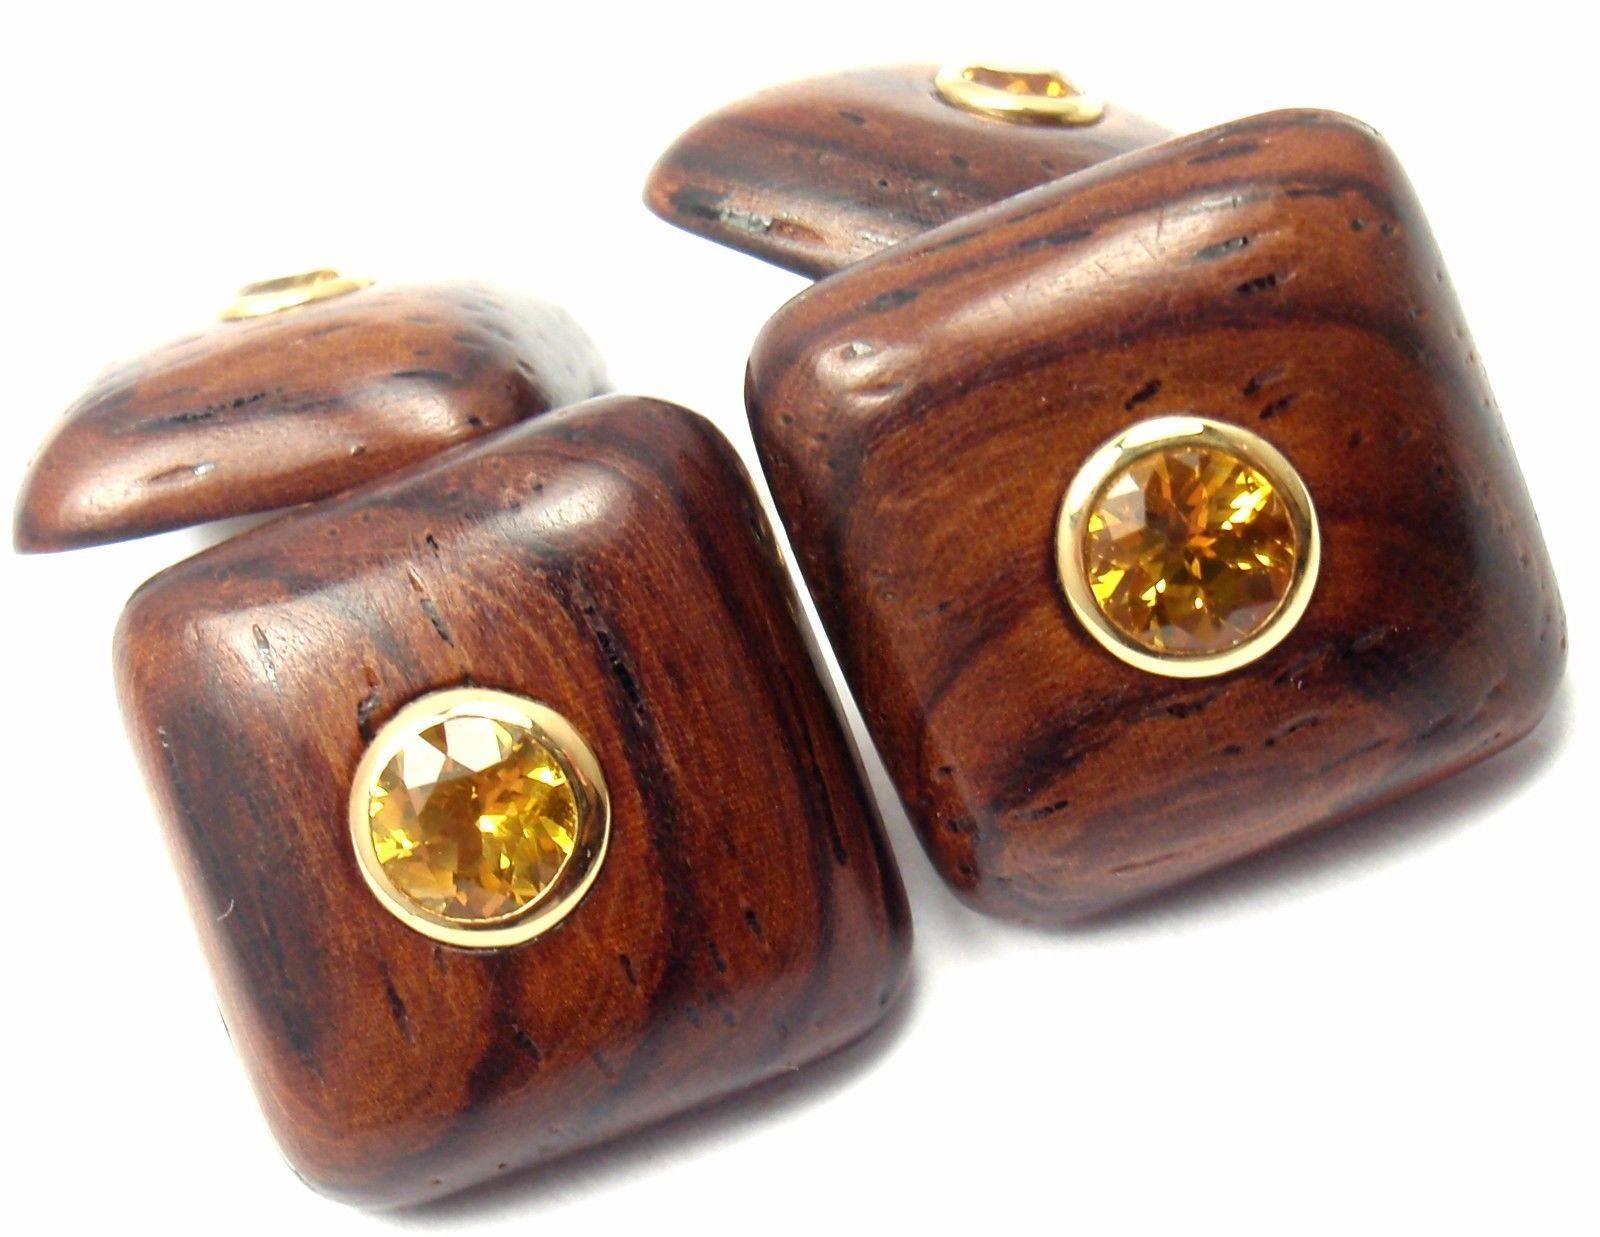 18k Yellow Gold Yellow Sapphire Wood Cufflinks by Tiffany & Co.
With 4 Round Yellow Sapphires
4 Wood

Details:
Measurements: 13mm x 12mm x 25mm
Weight: 4.8 grams
Stamped Hallmarks: Tiffany & Co.. 750
*Free Shipping within the United